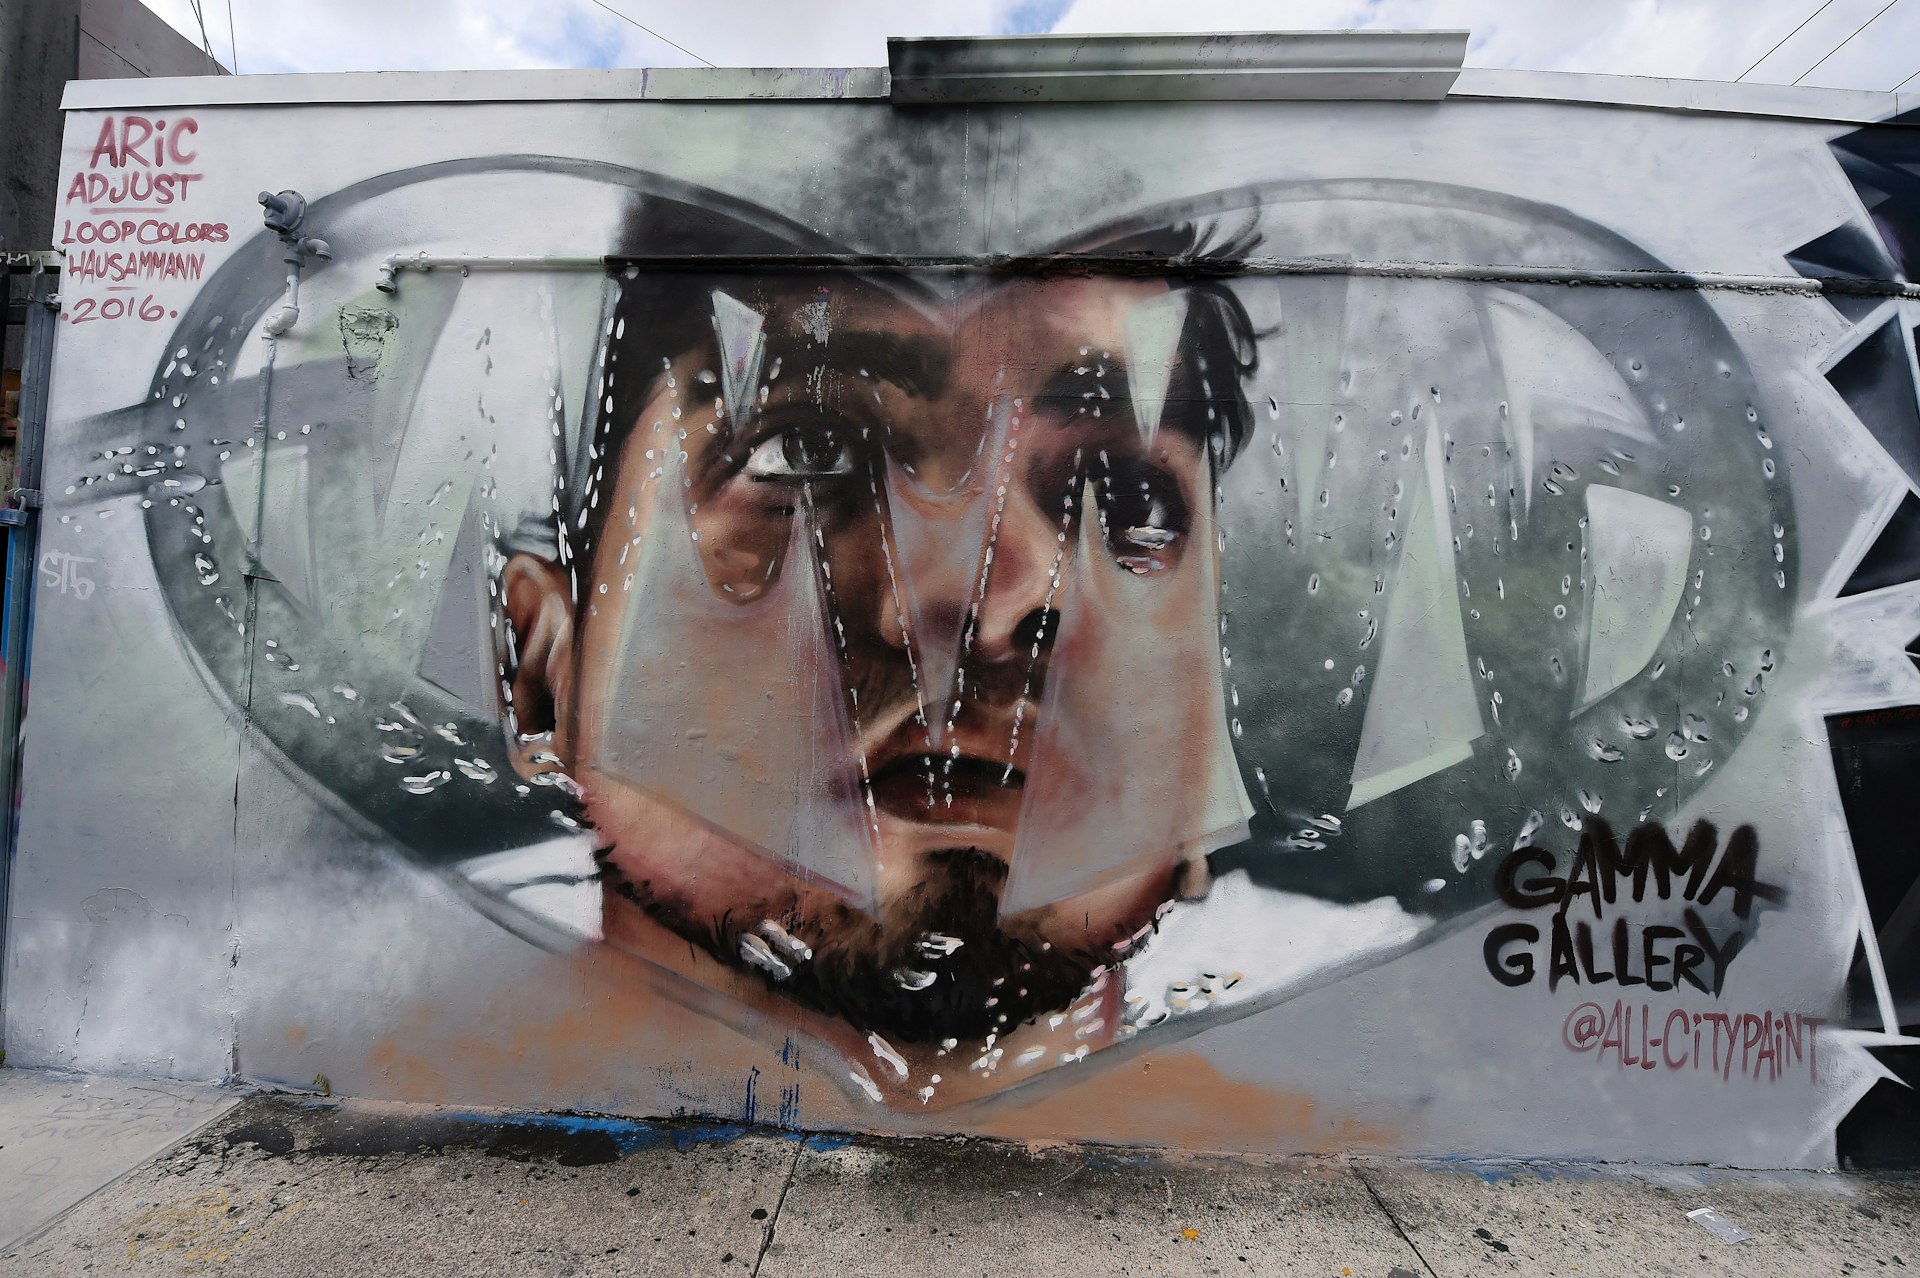 A mural covers the side of a building in the Wynwood neighborhood of Miami, Florida, on September 28, 2016. Founder Tony Goldman, with his real estate company Goldman Properties, was devoted to revitalizing run down neighborhoods and create permanent outdoor mural exhibits. / AFP / RHONA WISE (Photo credit should read RHONA WISE/AFP/Getty Images)